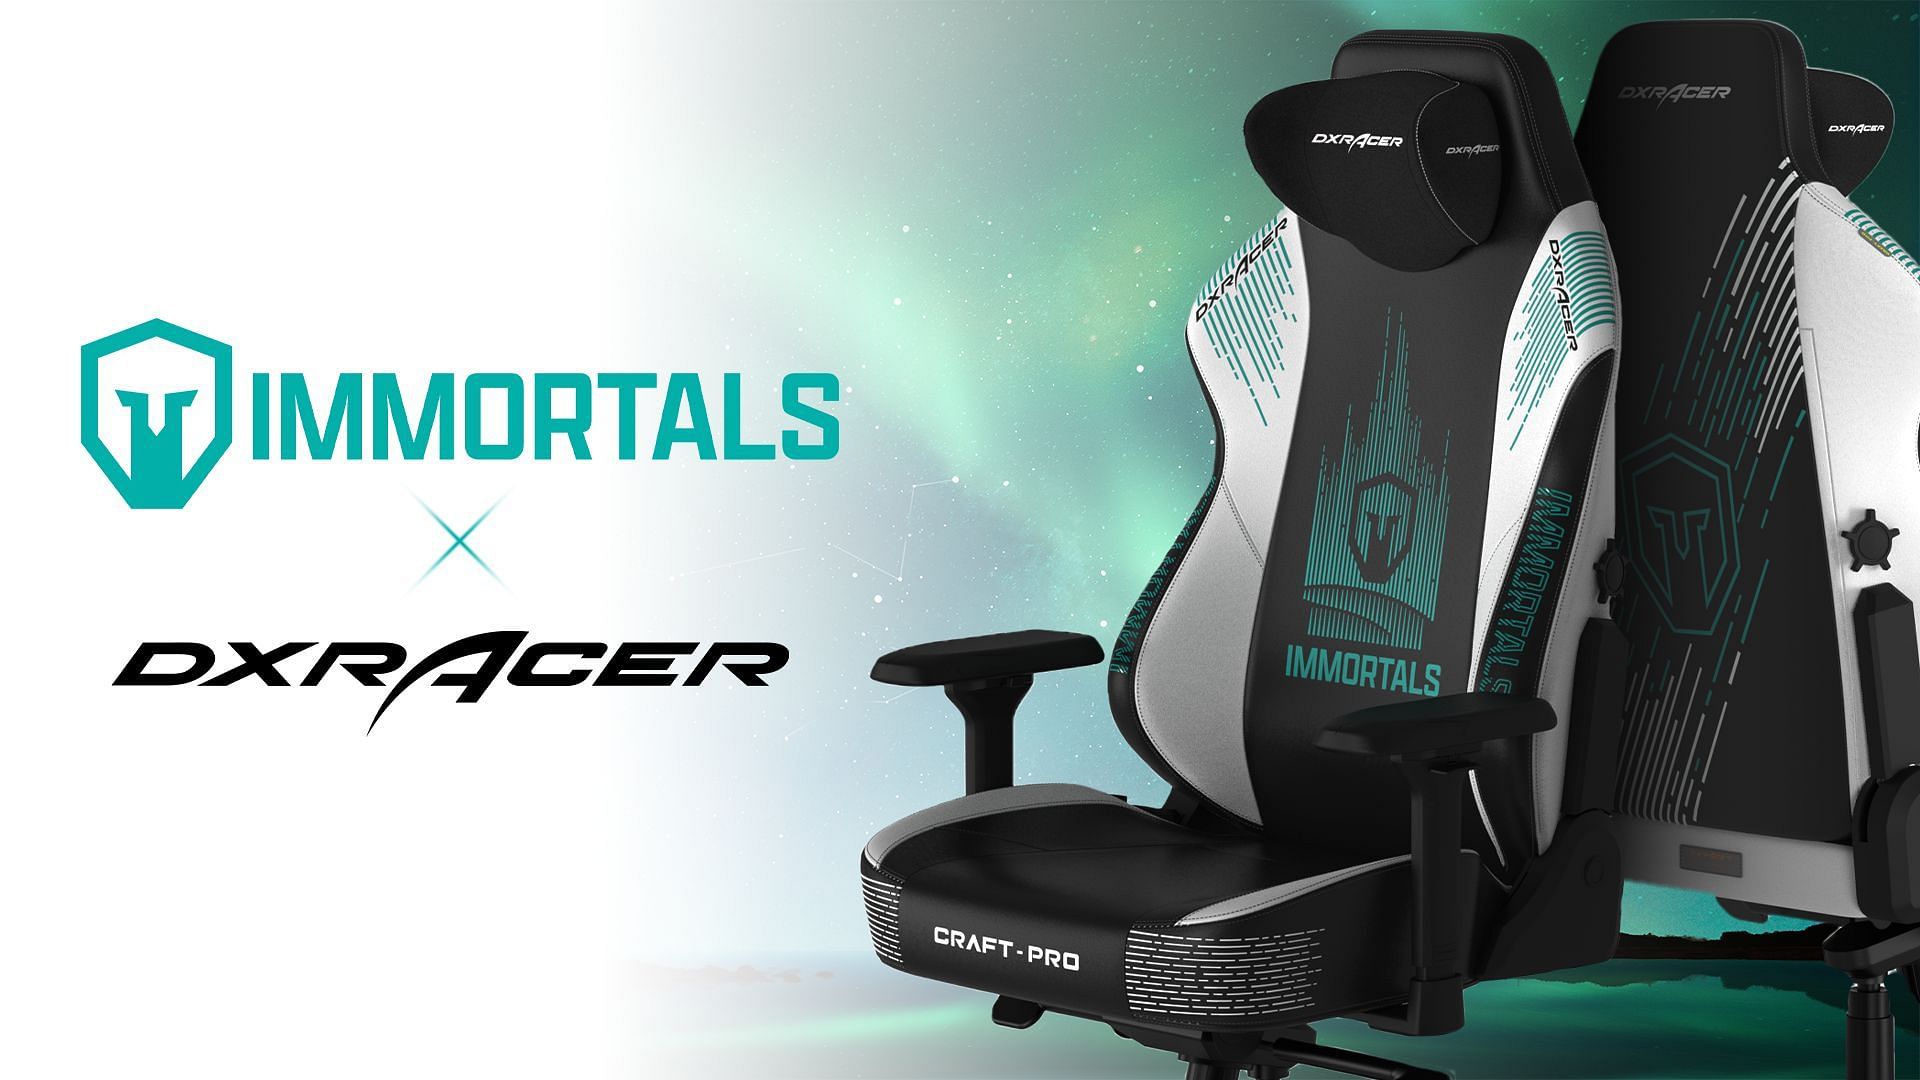 DXRacer and Immortals have teamed up to help improve the squad&#039;s comfort and ergonomics (Image via Immortals Gaming)